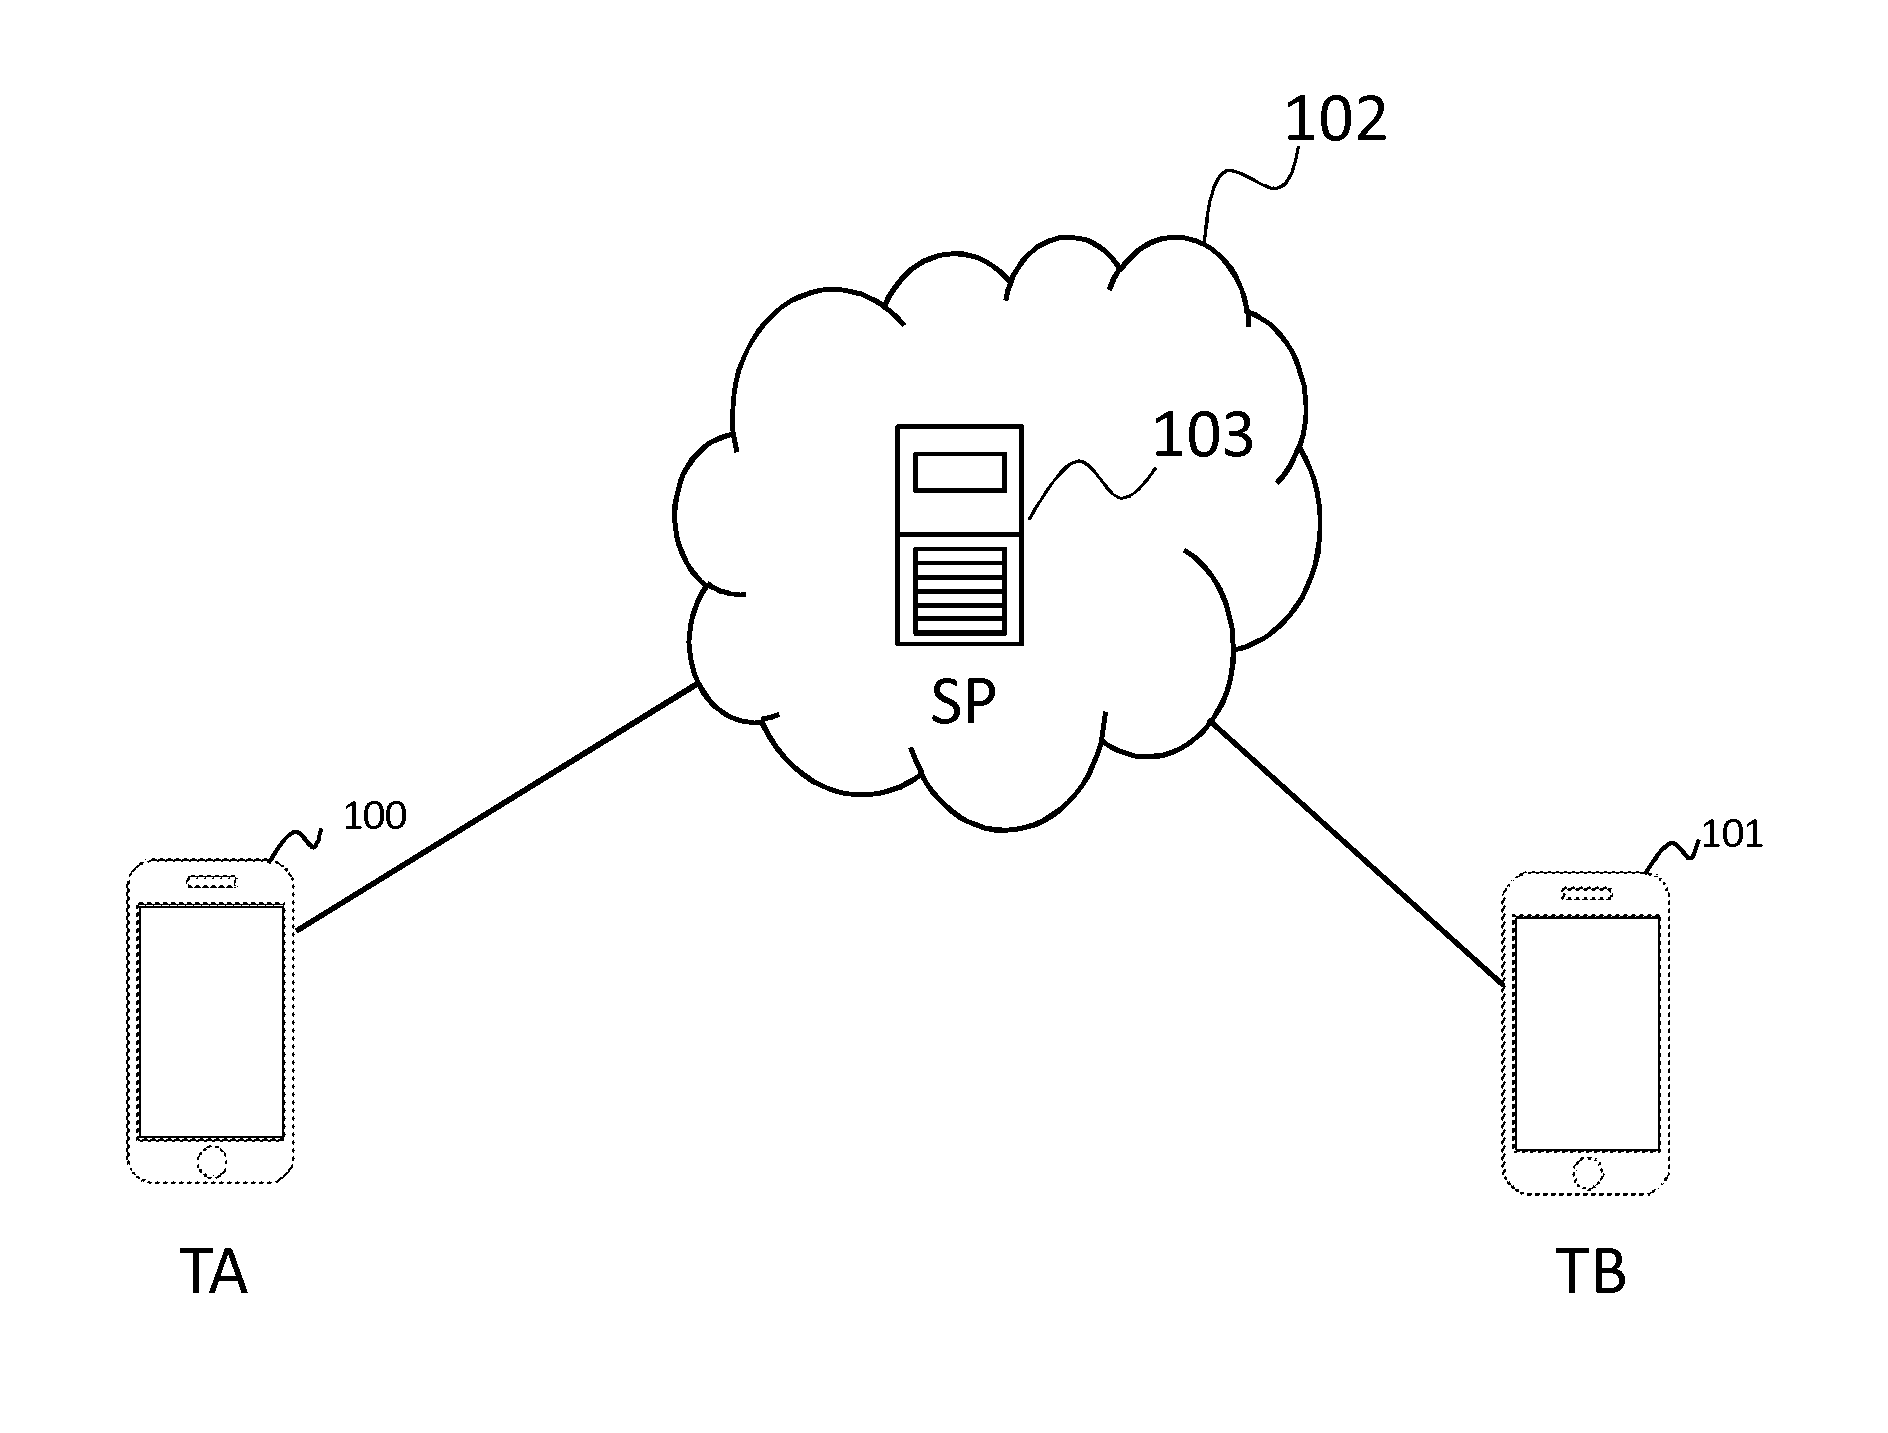 Method of synchronous image sharing